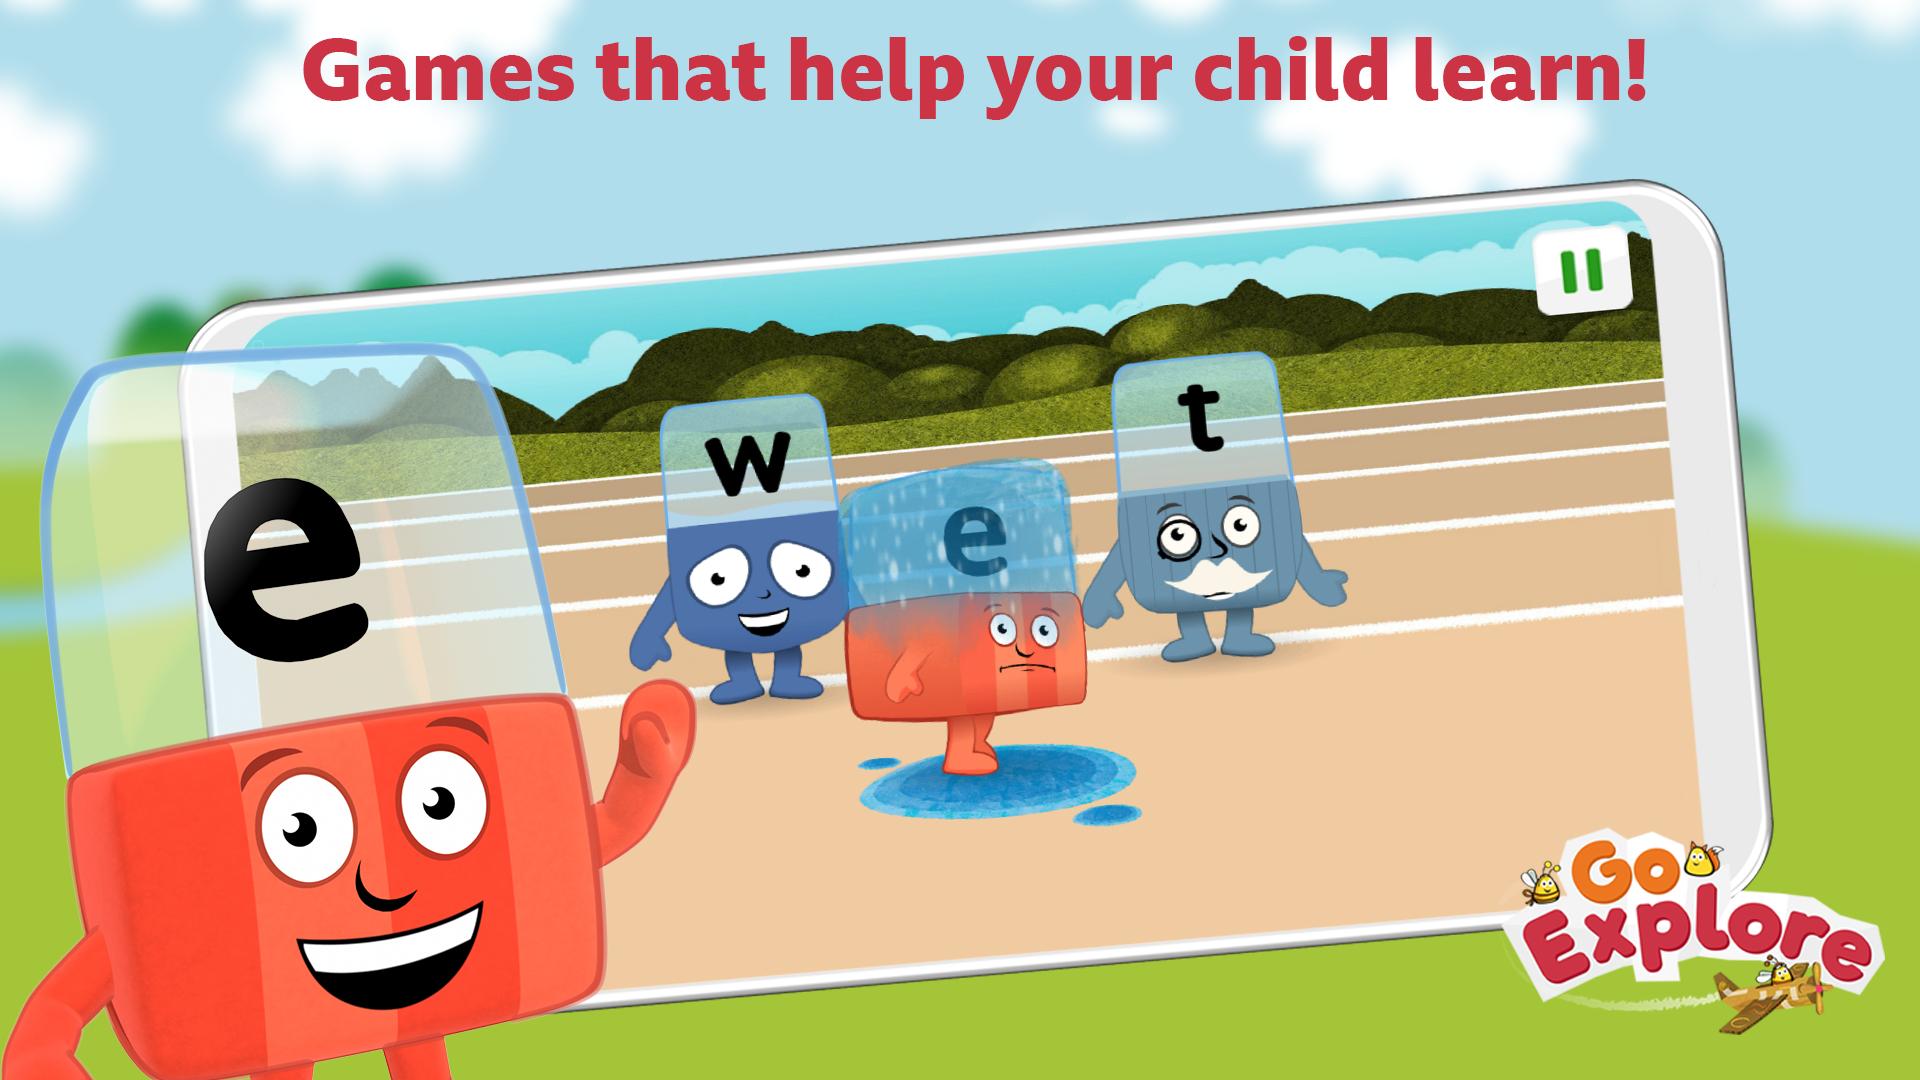 BBC CBeebies Go Explore - Learning games for kids 2.4.0 Screenshot 1